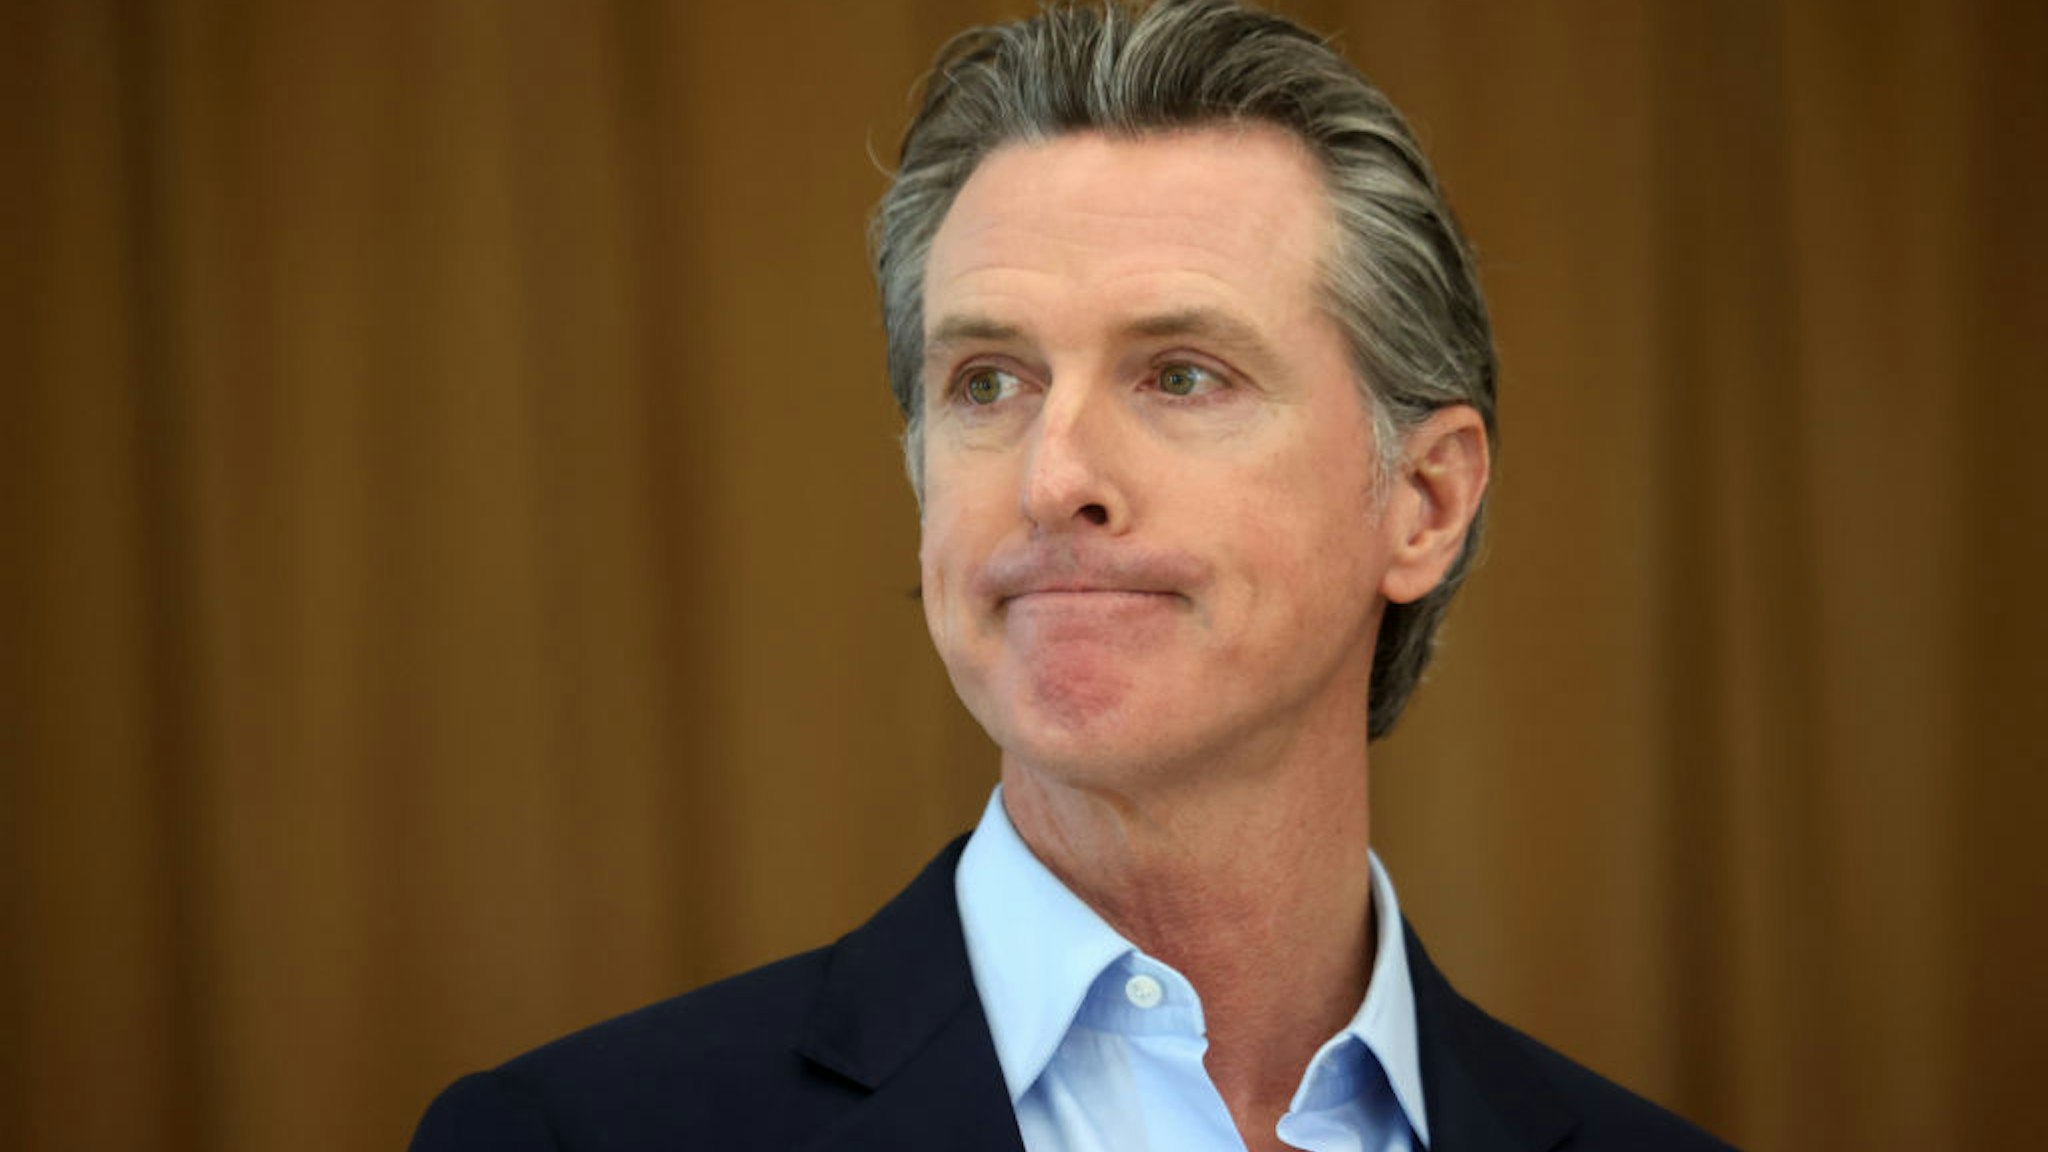 ALAMEDA, CALIFORNIA - MARCH 16: California Gov. Gavin Newsom looks on during a news conference after he toured the newly reopened Ruby Bridges Elementary School on March 16, 2021 in Alameda, California. Gov. Newsom is traveling throughout California to highlight the state's efforts to reopen schools and businesses as he faces the threat of recall. (Photo by Justin Sullivan/Getty Images)